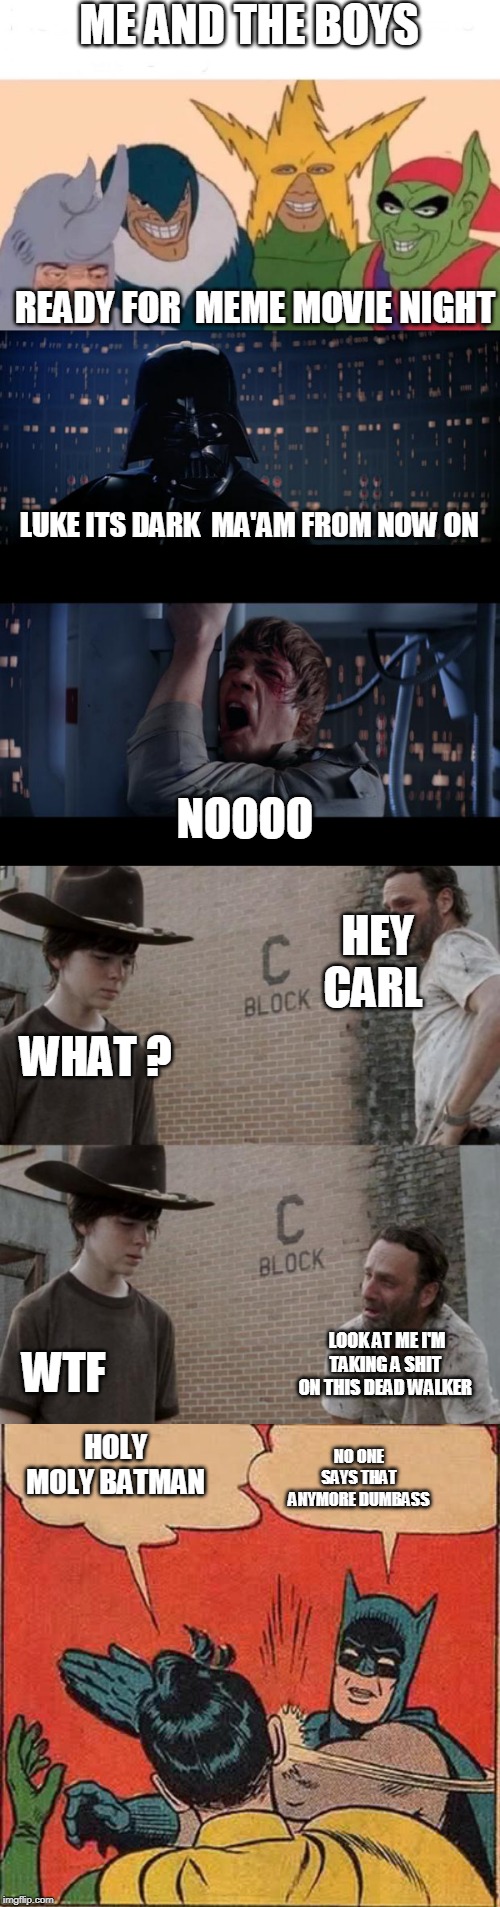 Rick  standing there like hes taking a dump | ME AND THE BOYS; READY FOR  MEME MOVIE NIGHT; LUKE ITS DARK  MA'AM FROM NOW ON; NOOOO; HEY CARL; WHAT ? WTF; LOOK AT ME I'M TAKING A SHIT  ON THIS DEAD WALKER; HOLY MOLY BATMAN; NO ONE SAYS THAT ANYMORE DUMBASS | image tagged in pooping | made w/ Imgflip meme maker